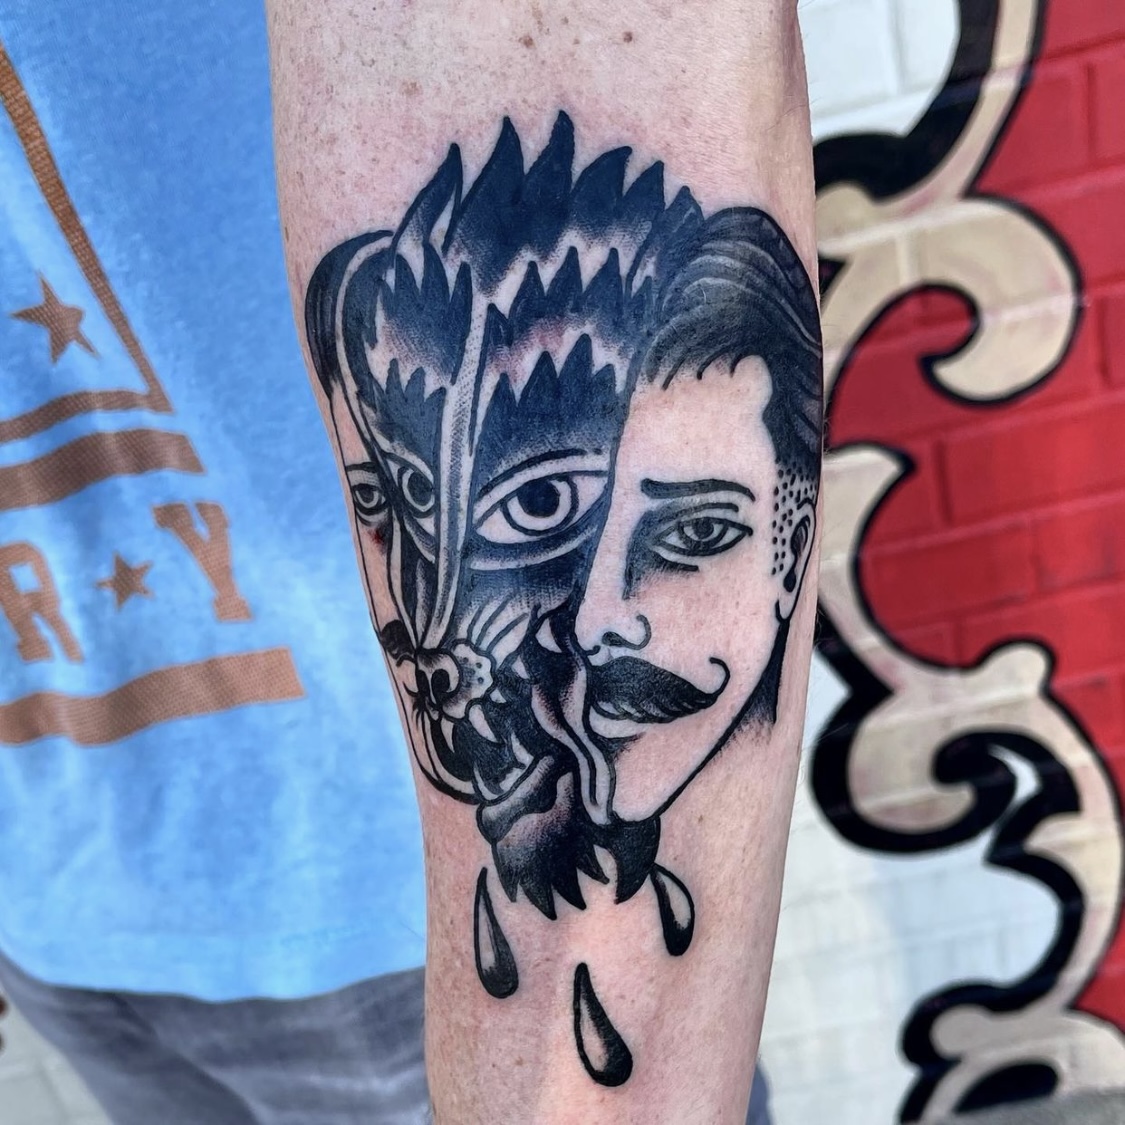 Black tattoo of a wolf and man from best tattoo shops in dallas tx